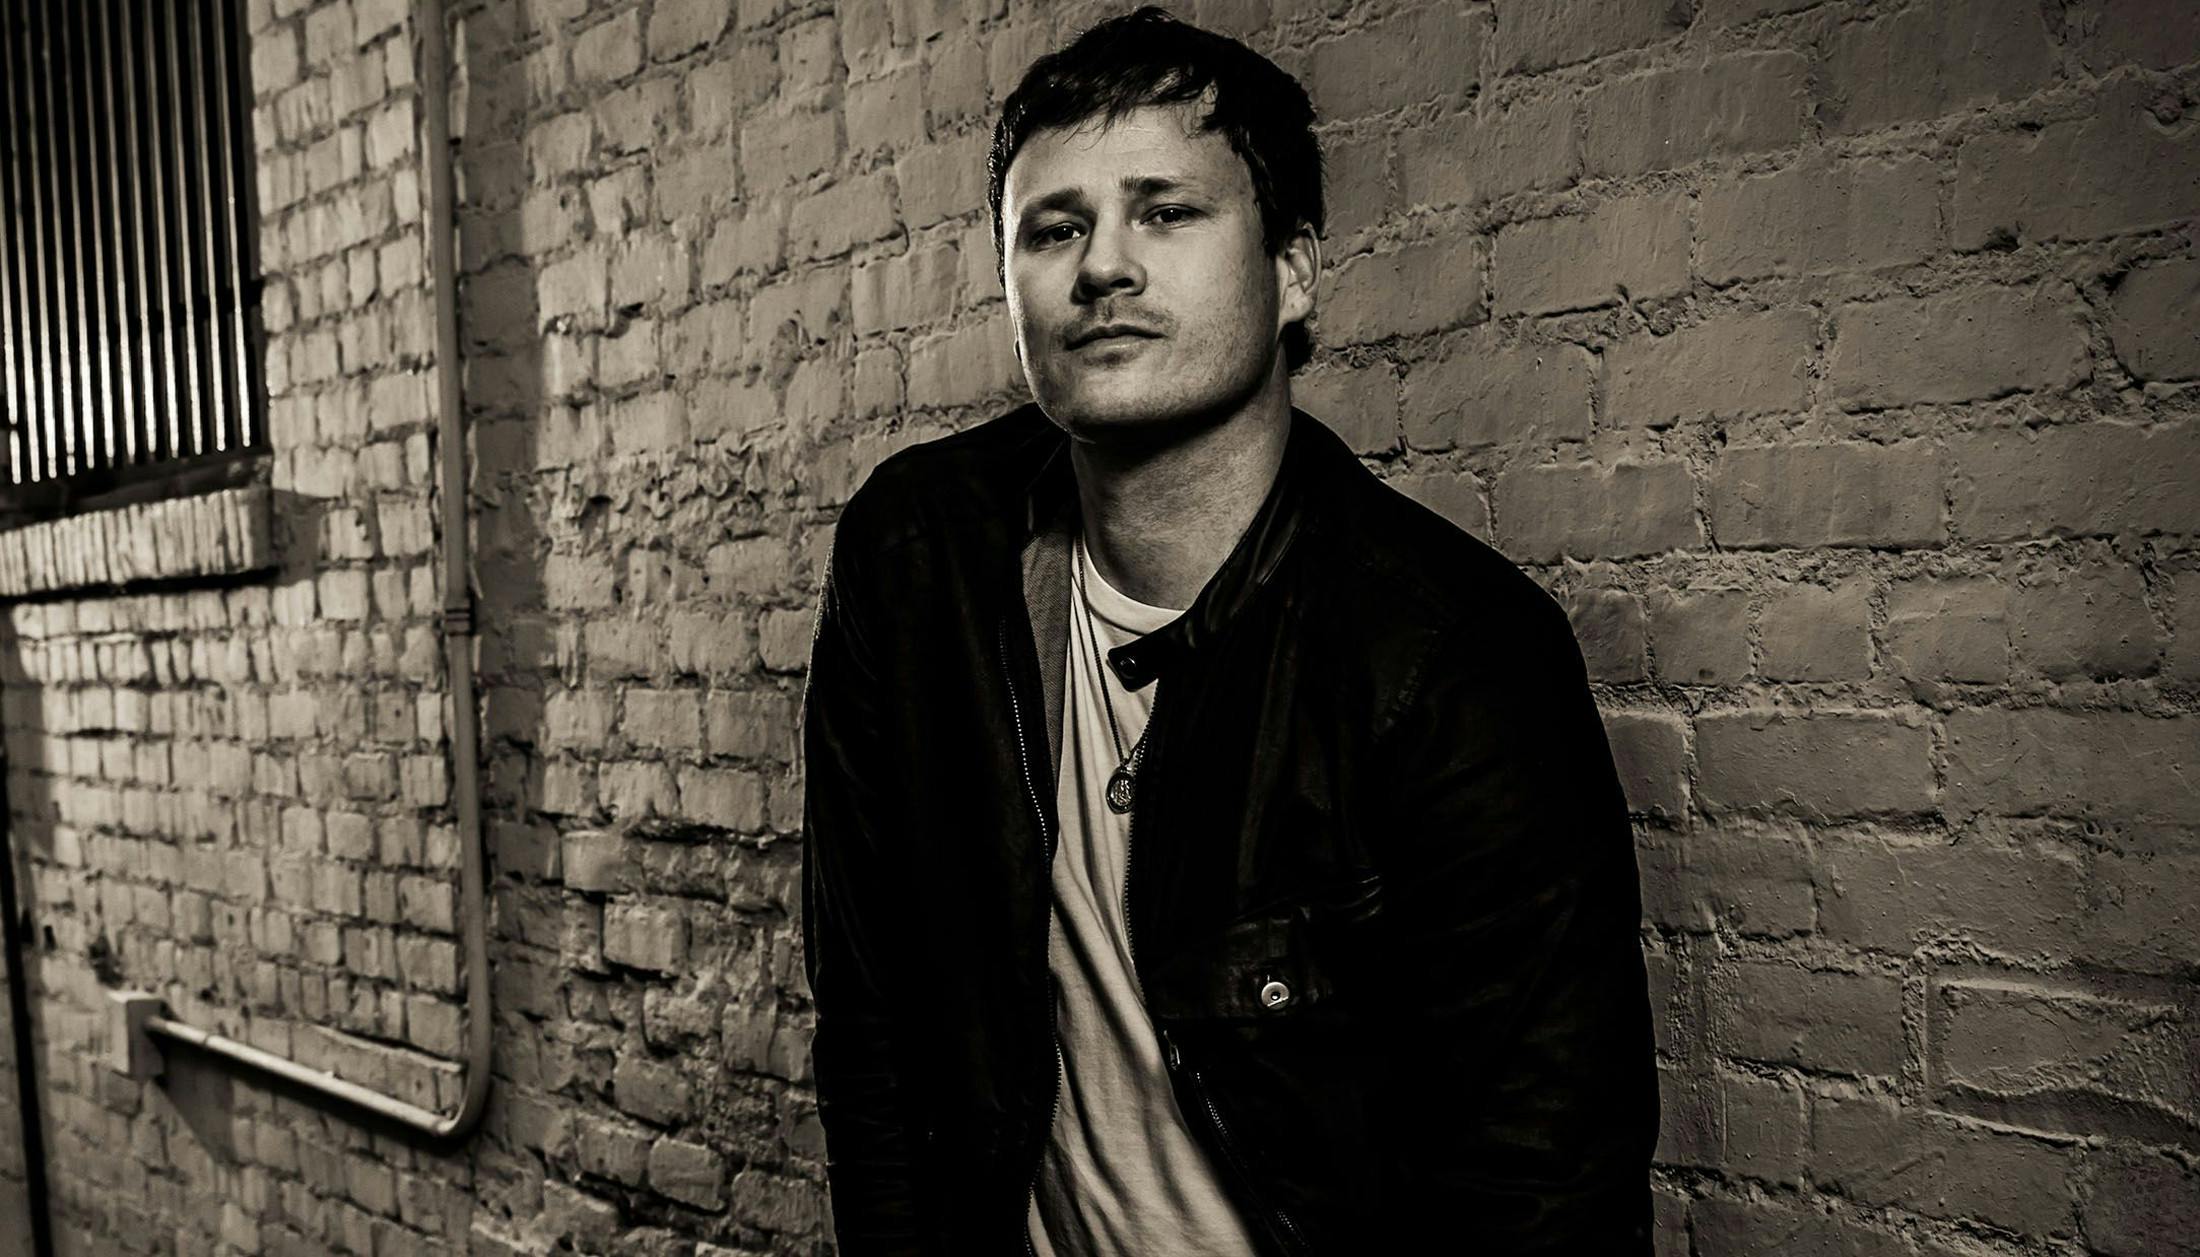 Angels & Airwaves' New Song Sounds Like Box Car Racer, According To Tom DeLonge